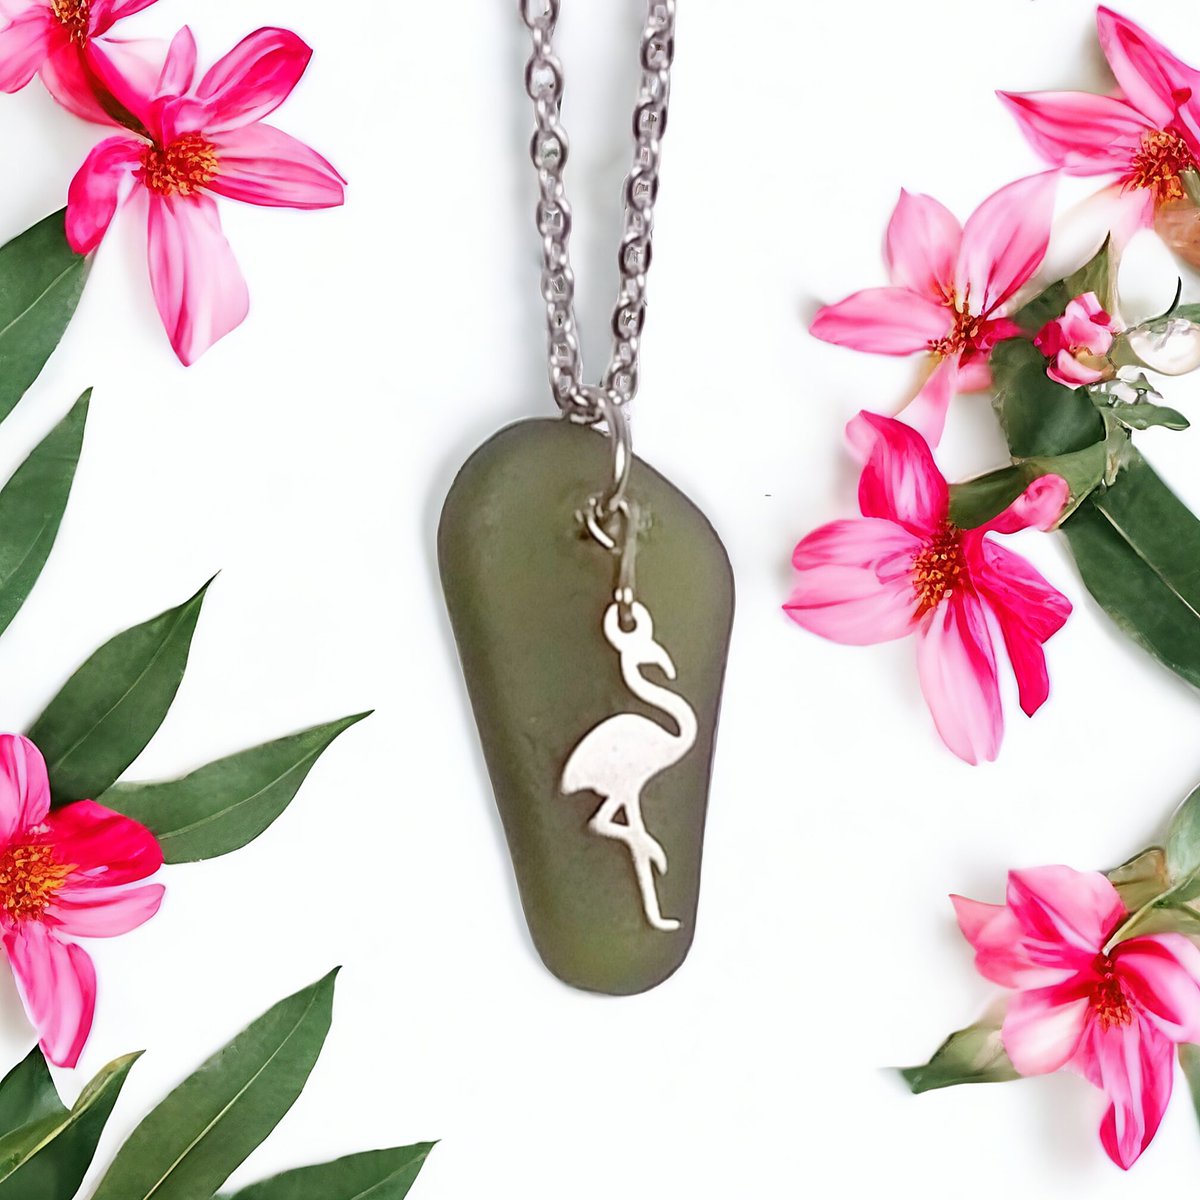 Olive green Seaglass flamingo charm necklace 💚 available soon in my shop x #craftmakersuk #TheCraftersUk #getthatgift #SmartSocial #HandmadeHour #UKGiftAM #handmadeinbritain #BizBubble #networkwiththrive #UKGiftHour #bizhour #Craftsuk #craftbizparty #necklace #seaglass #jewelry